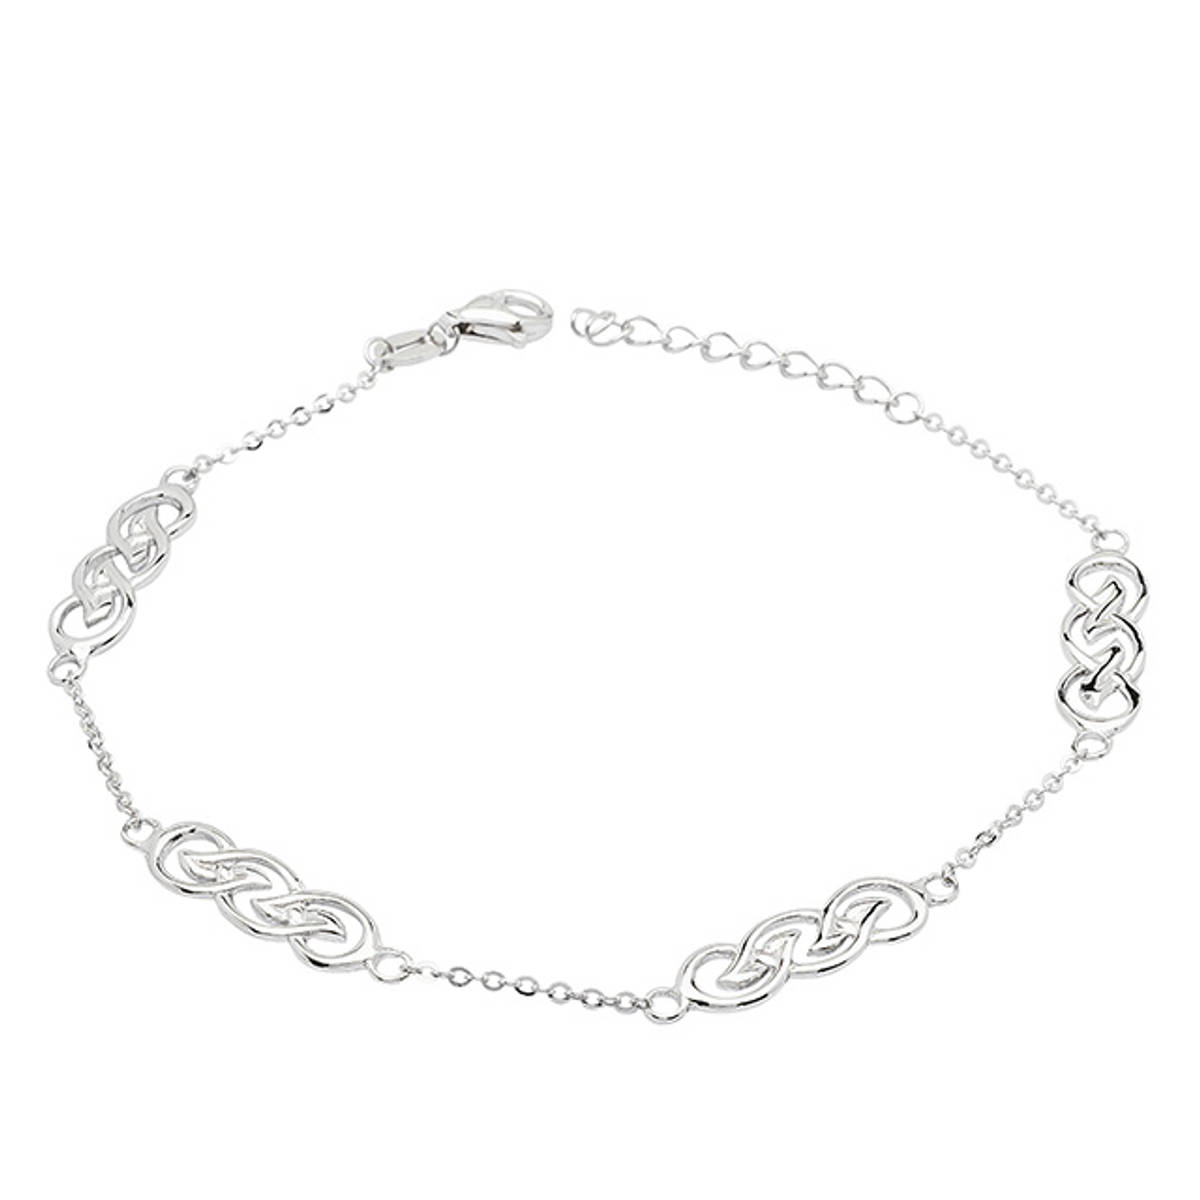 Sterling Silver Four Link And Chain Bracelet with Celtic Knot Design.